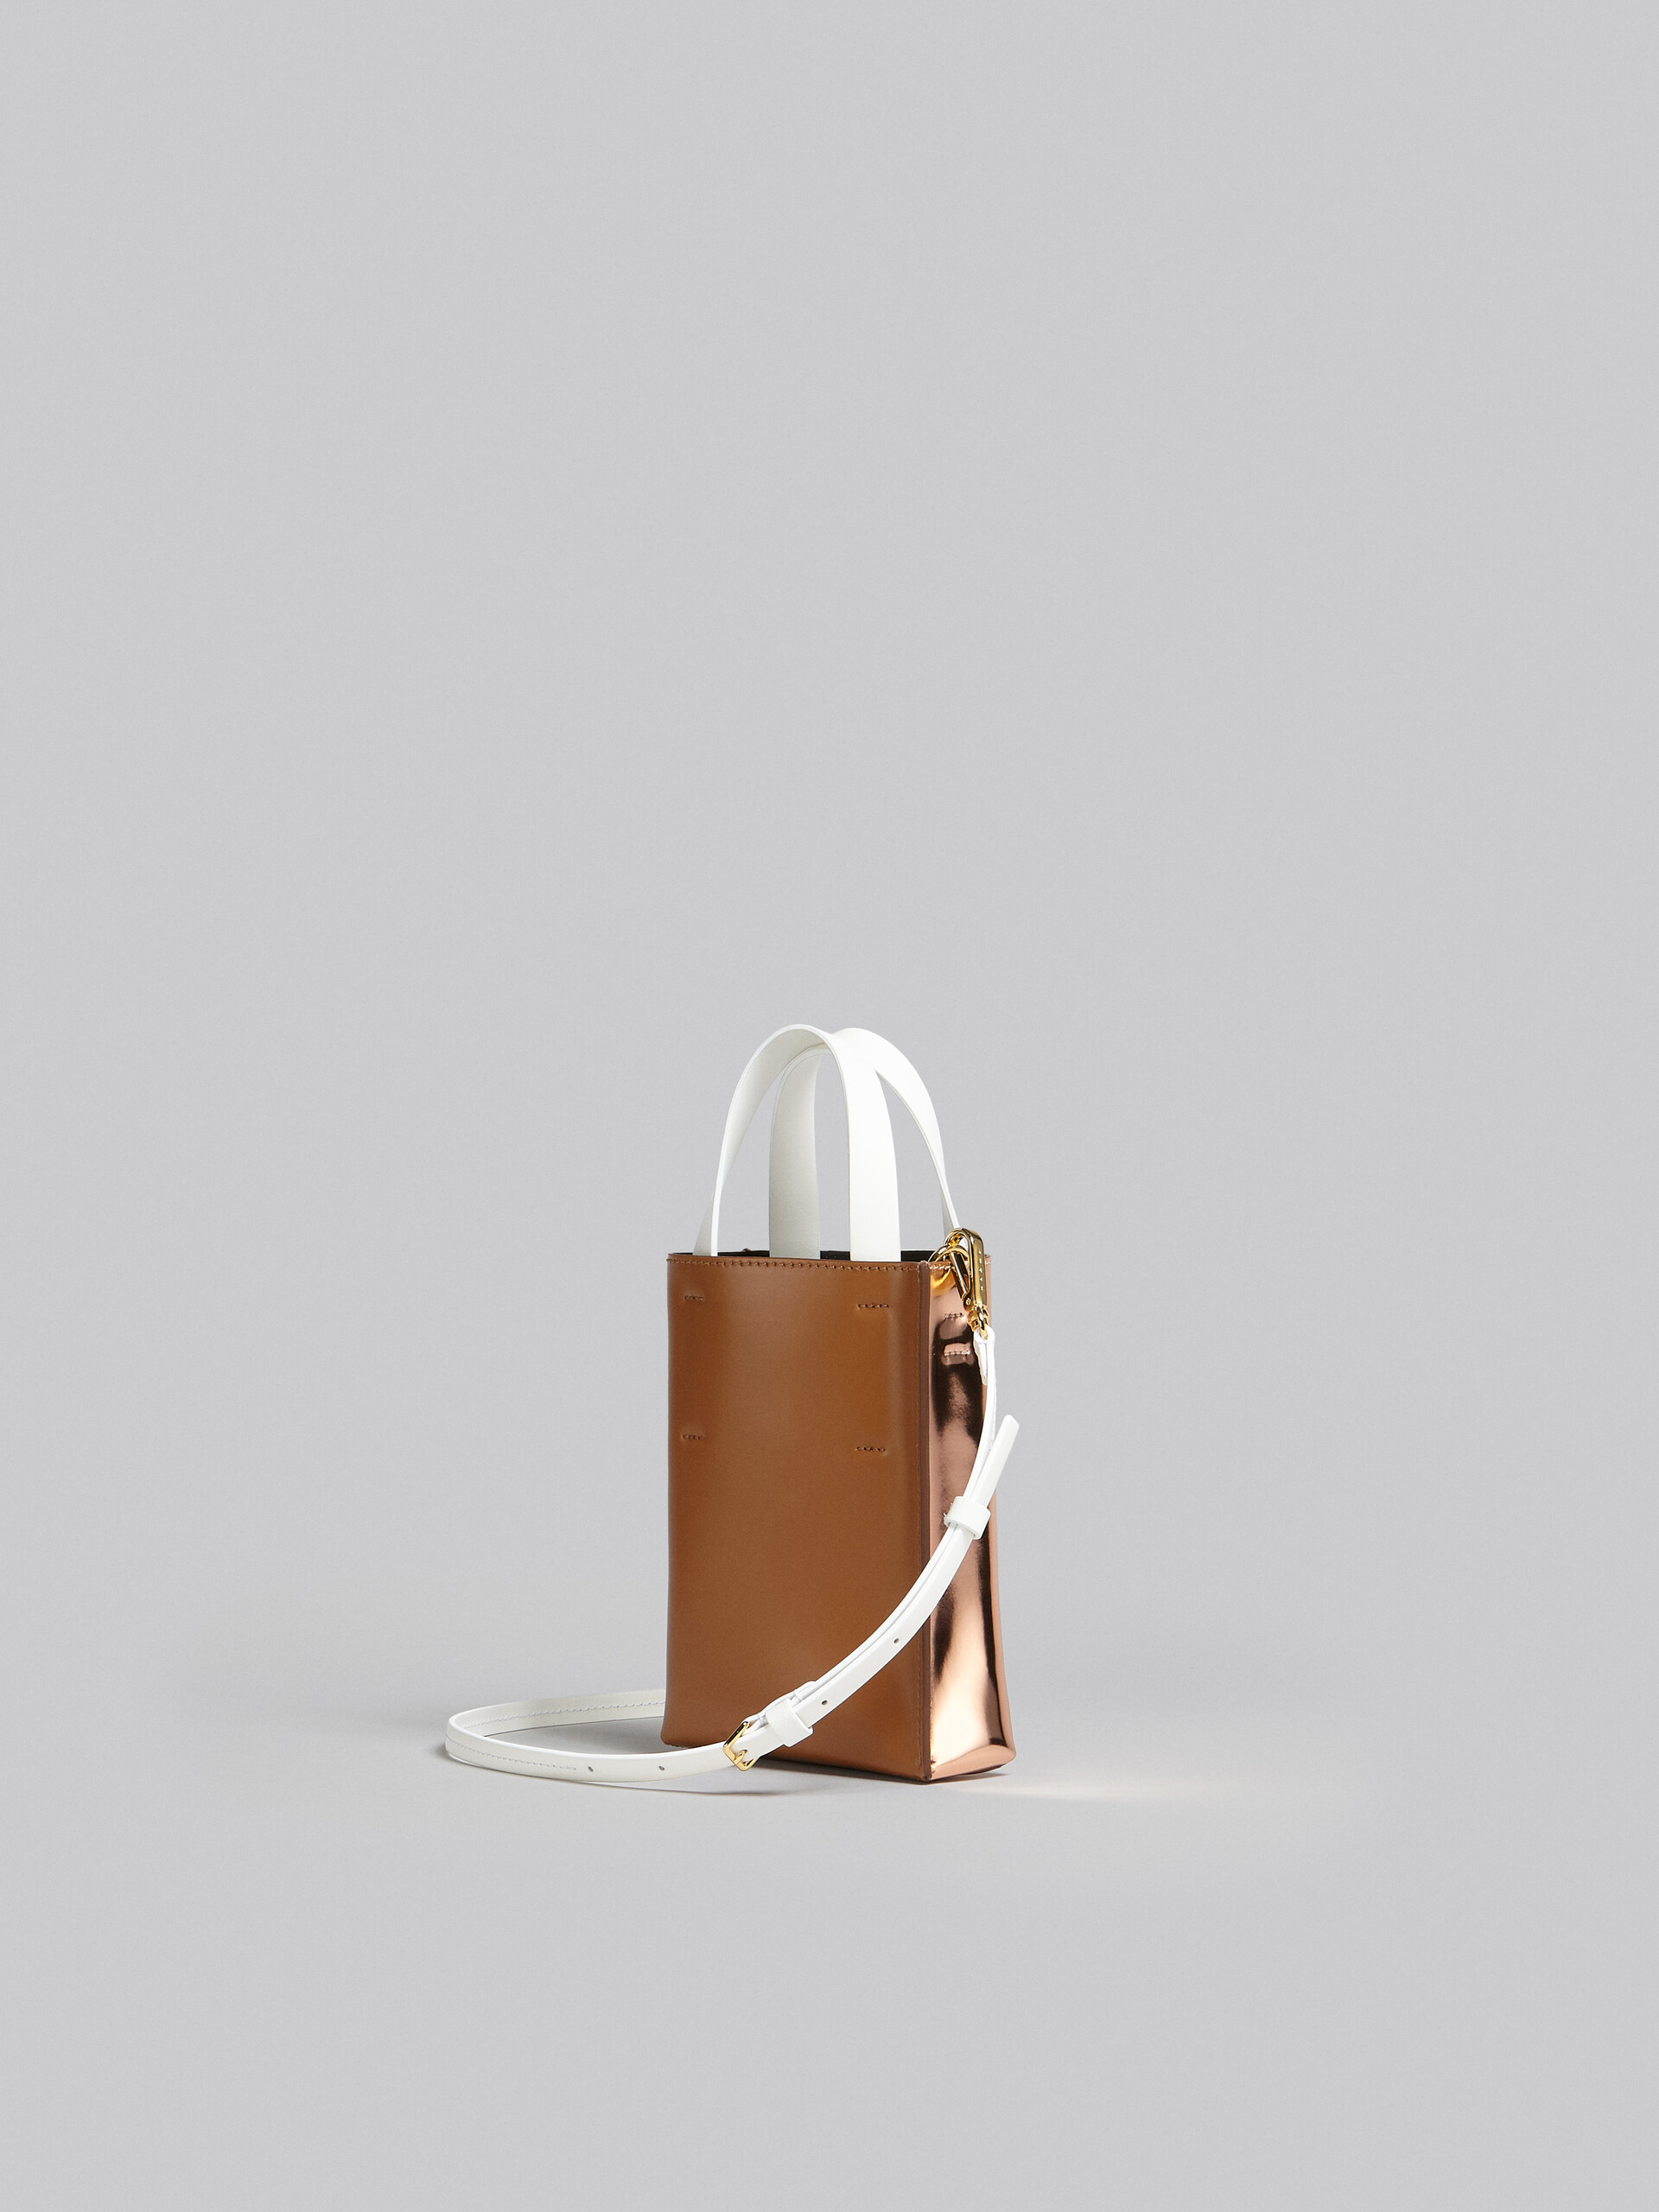 Museo Nano Bag in rose gold mirrored leather - Shopping Bags - Image 3